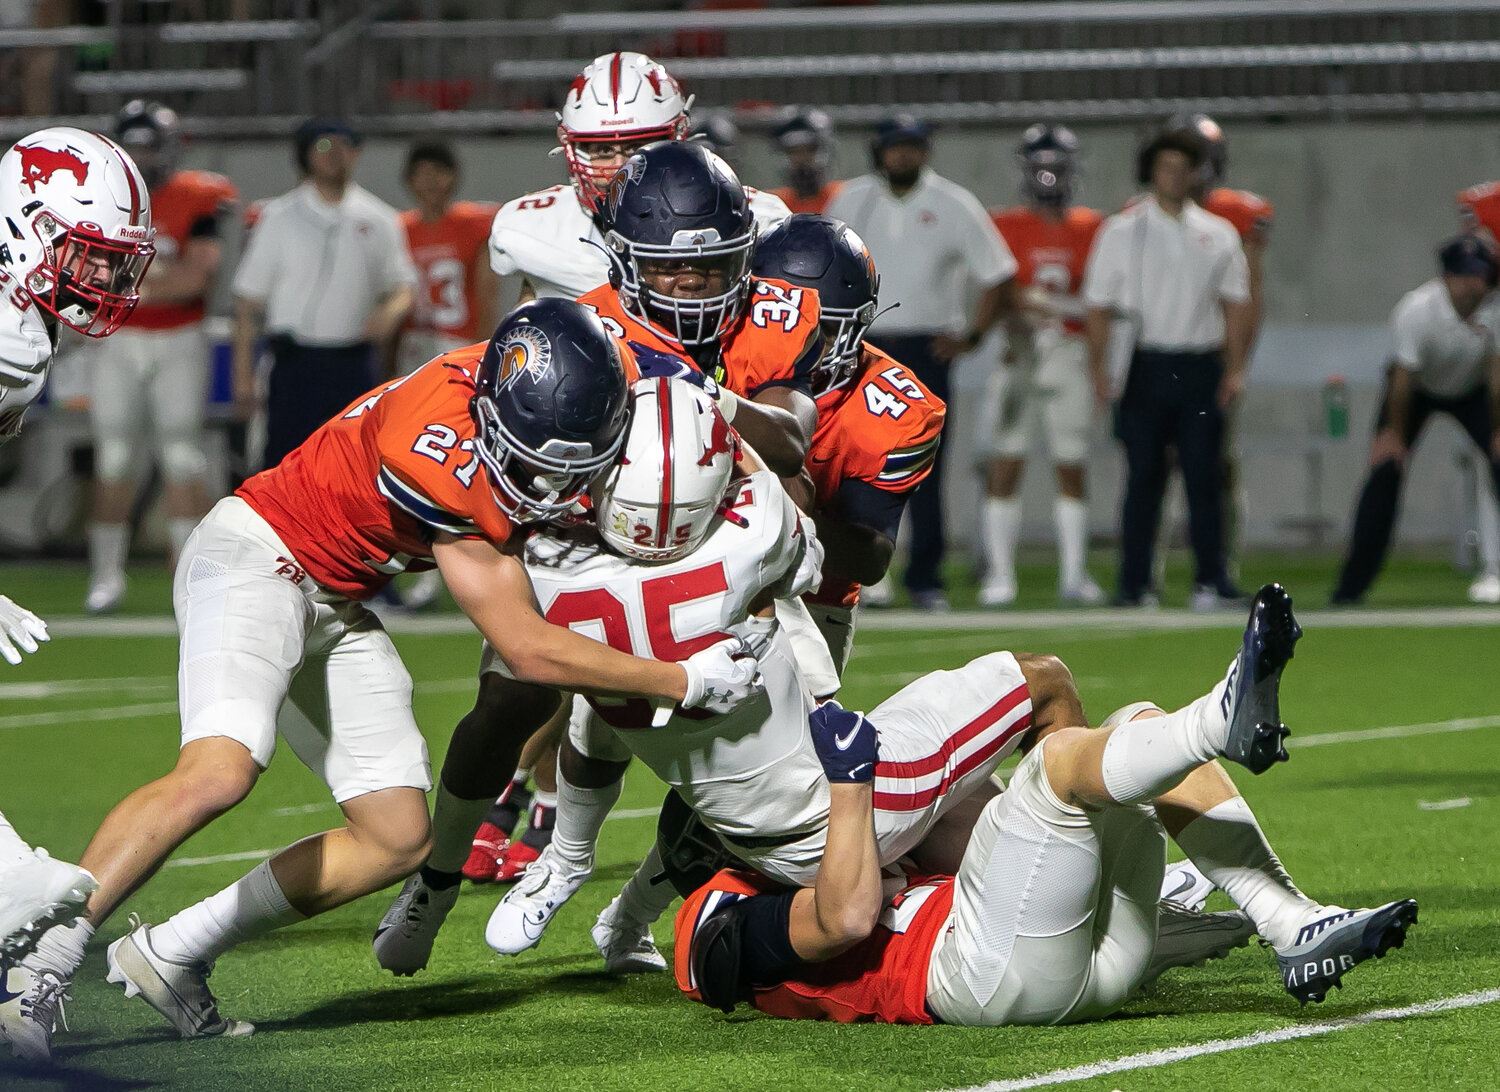 Seven Lakes players bring down Memorial's Cooper Gindorf during Thursday's game between Seven Lakes and Memorial at Legacy Stadium.